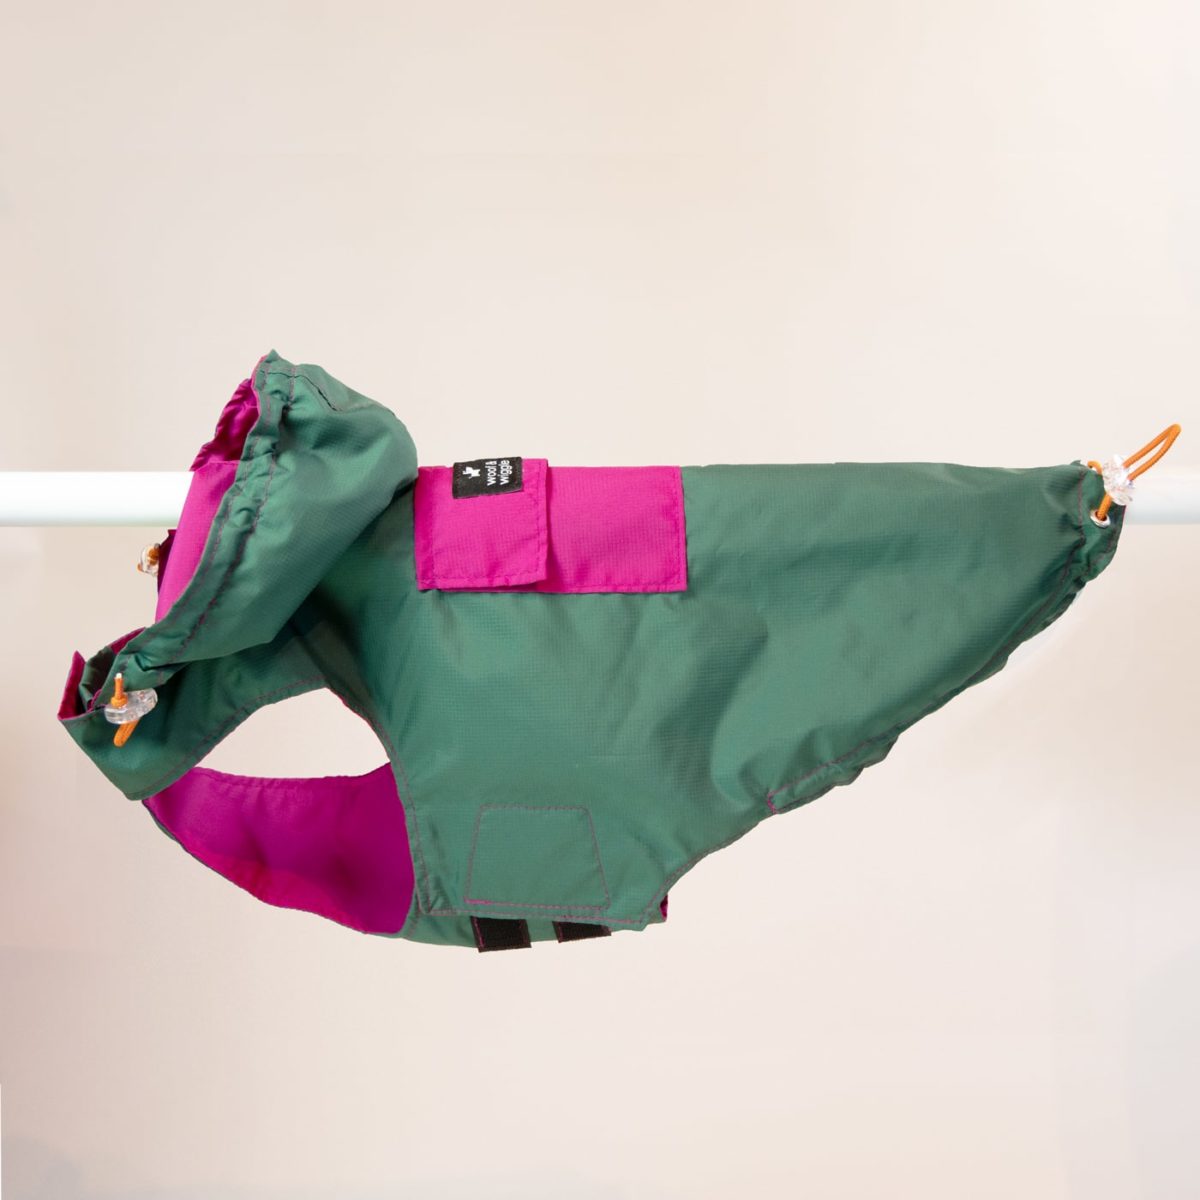 Raincoat for dogs in green and pink